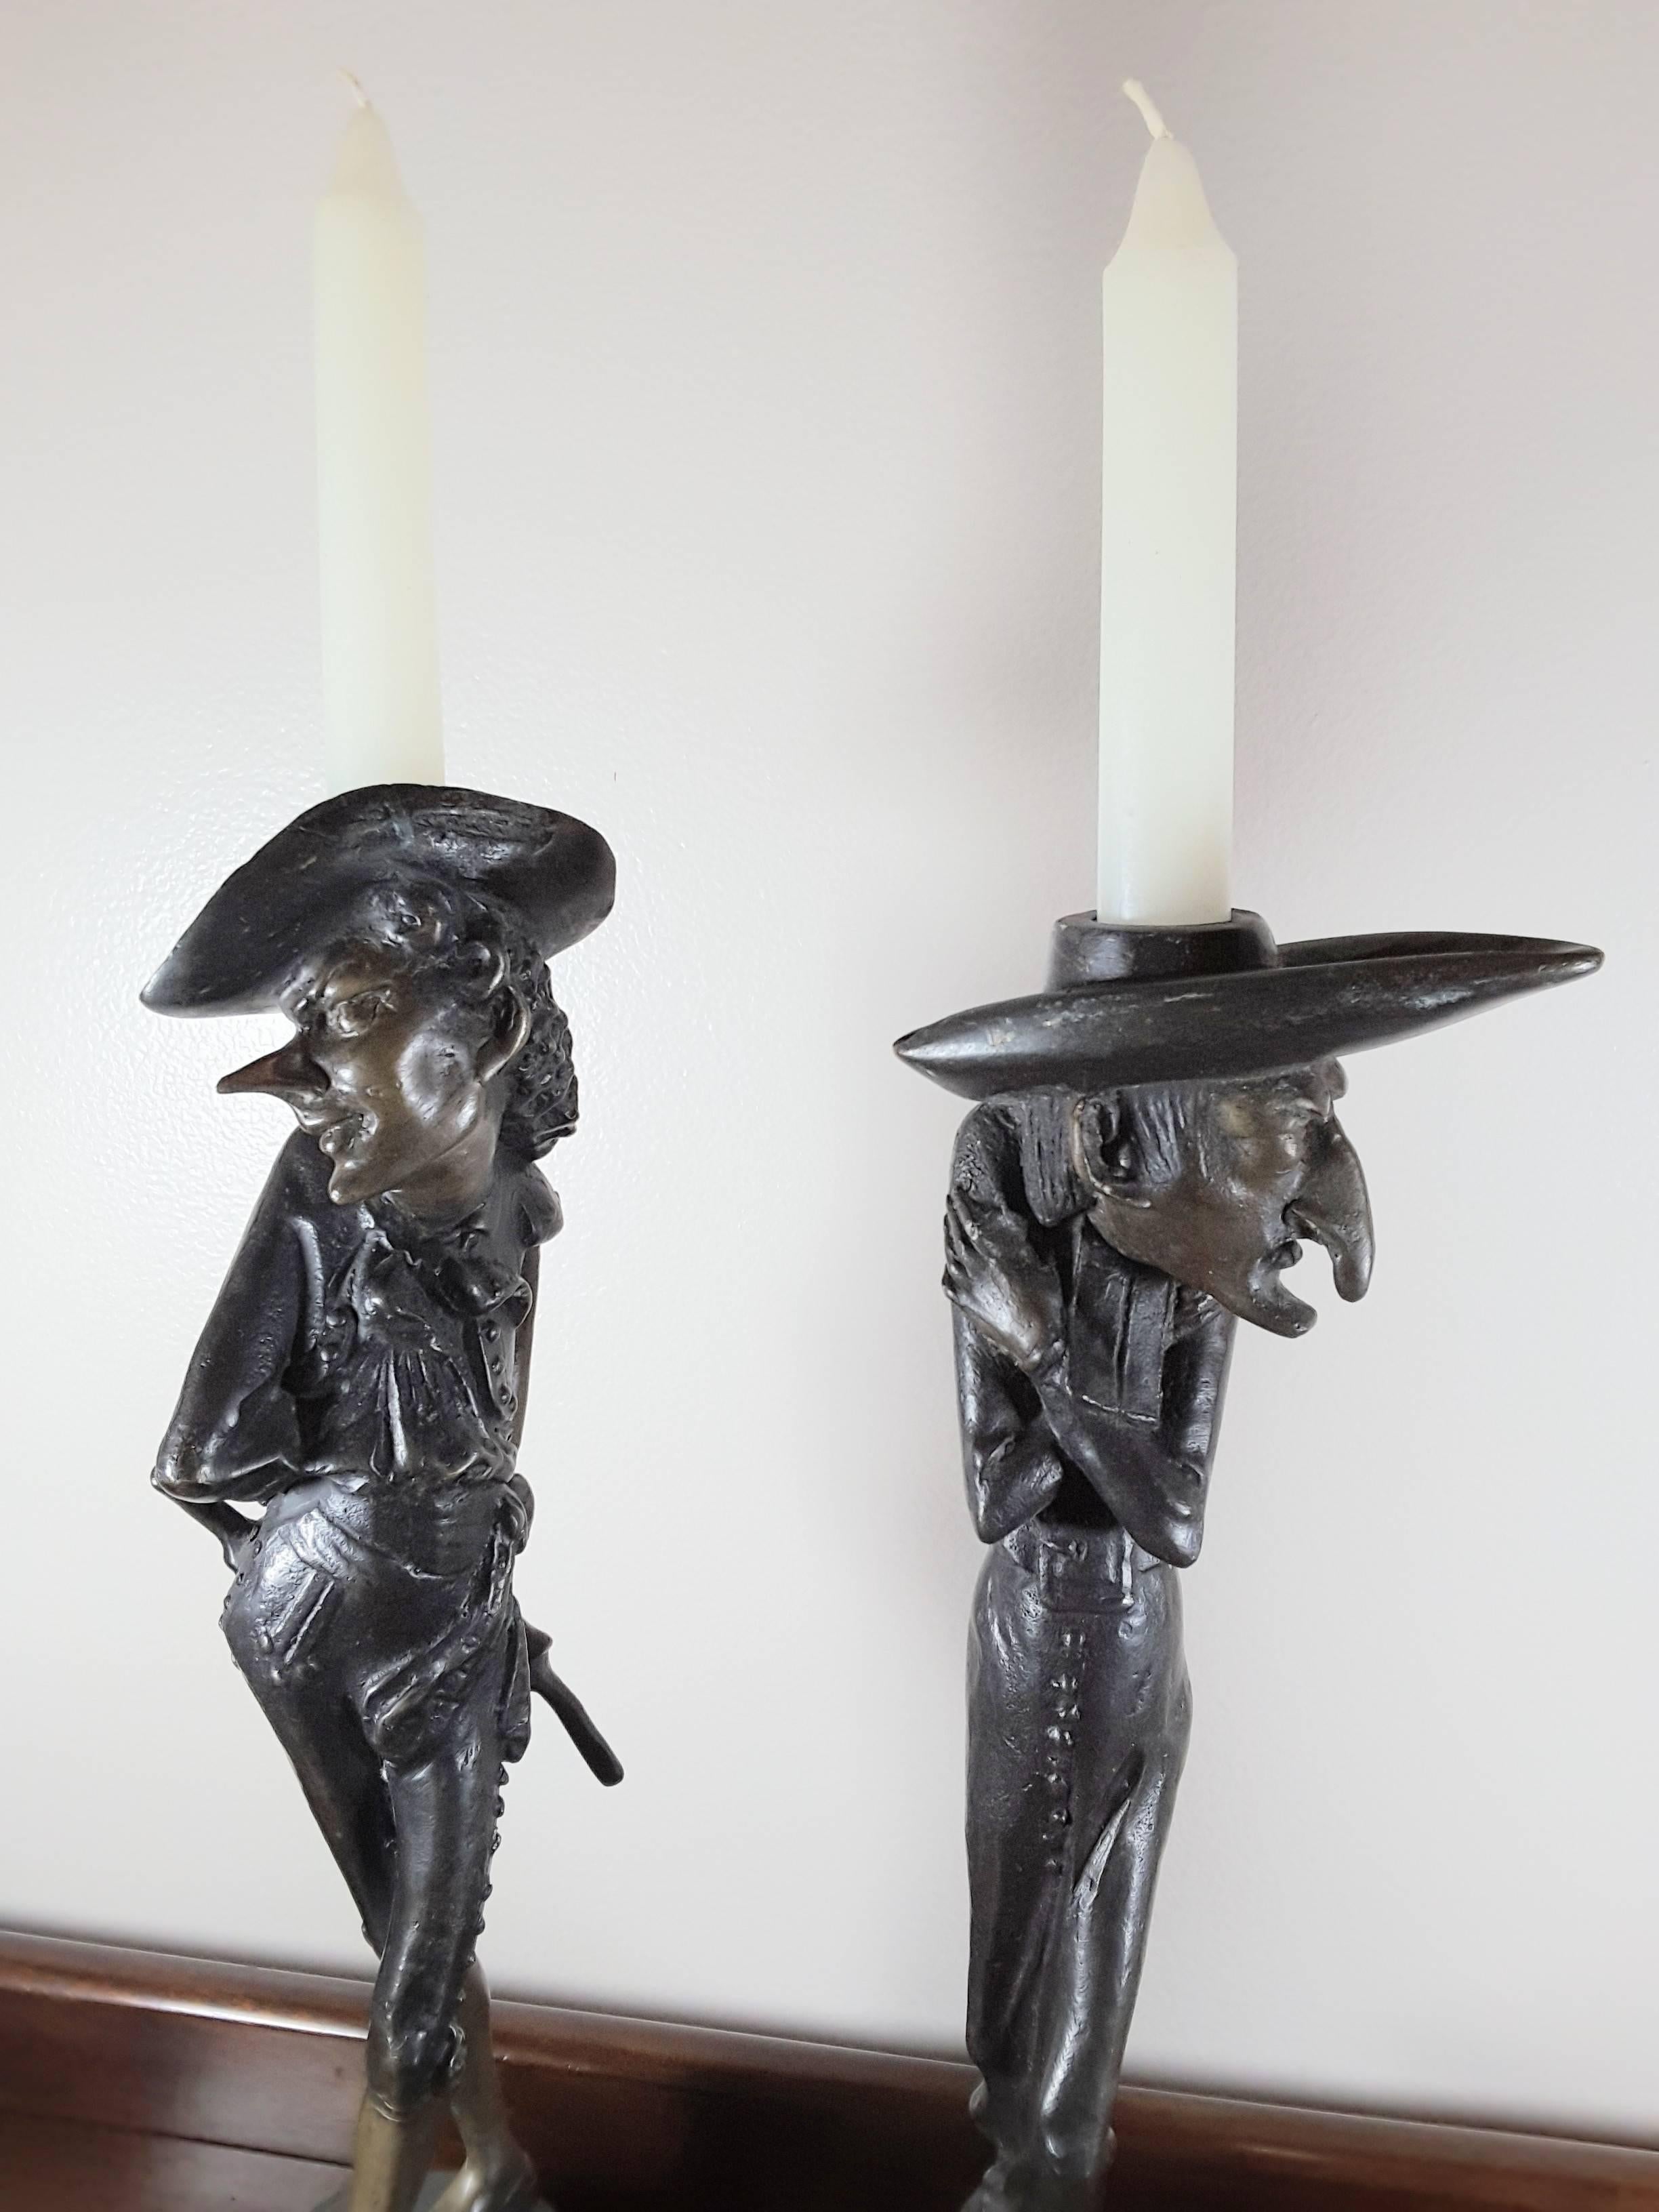 A pair of Fin De Siecle French Grotesque candlesticks, very stylized figures with elongated facial features and body styles. Done in a patinated bronze, Signed on the circular plinth bases (please see pic), One figure is in a long robe coat and the